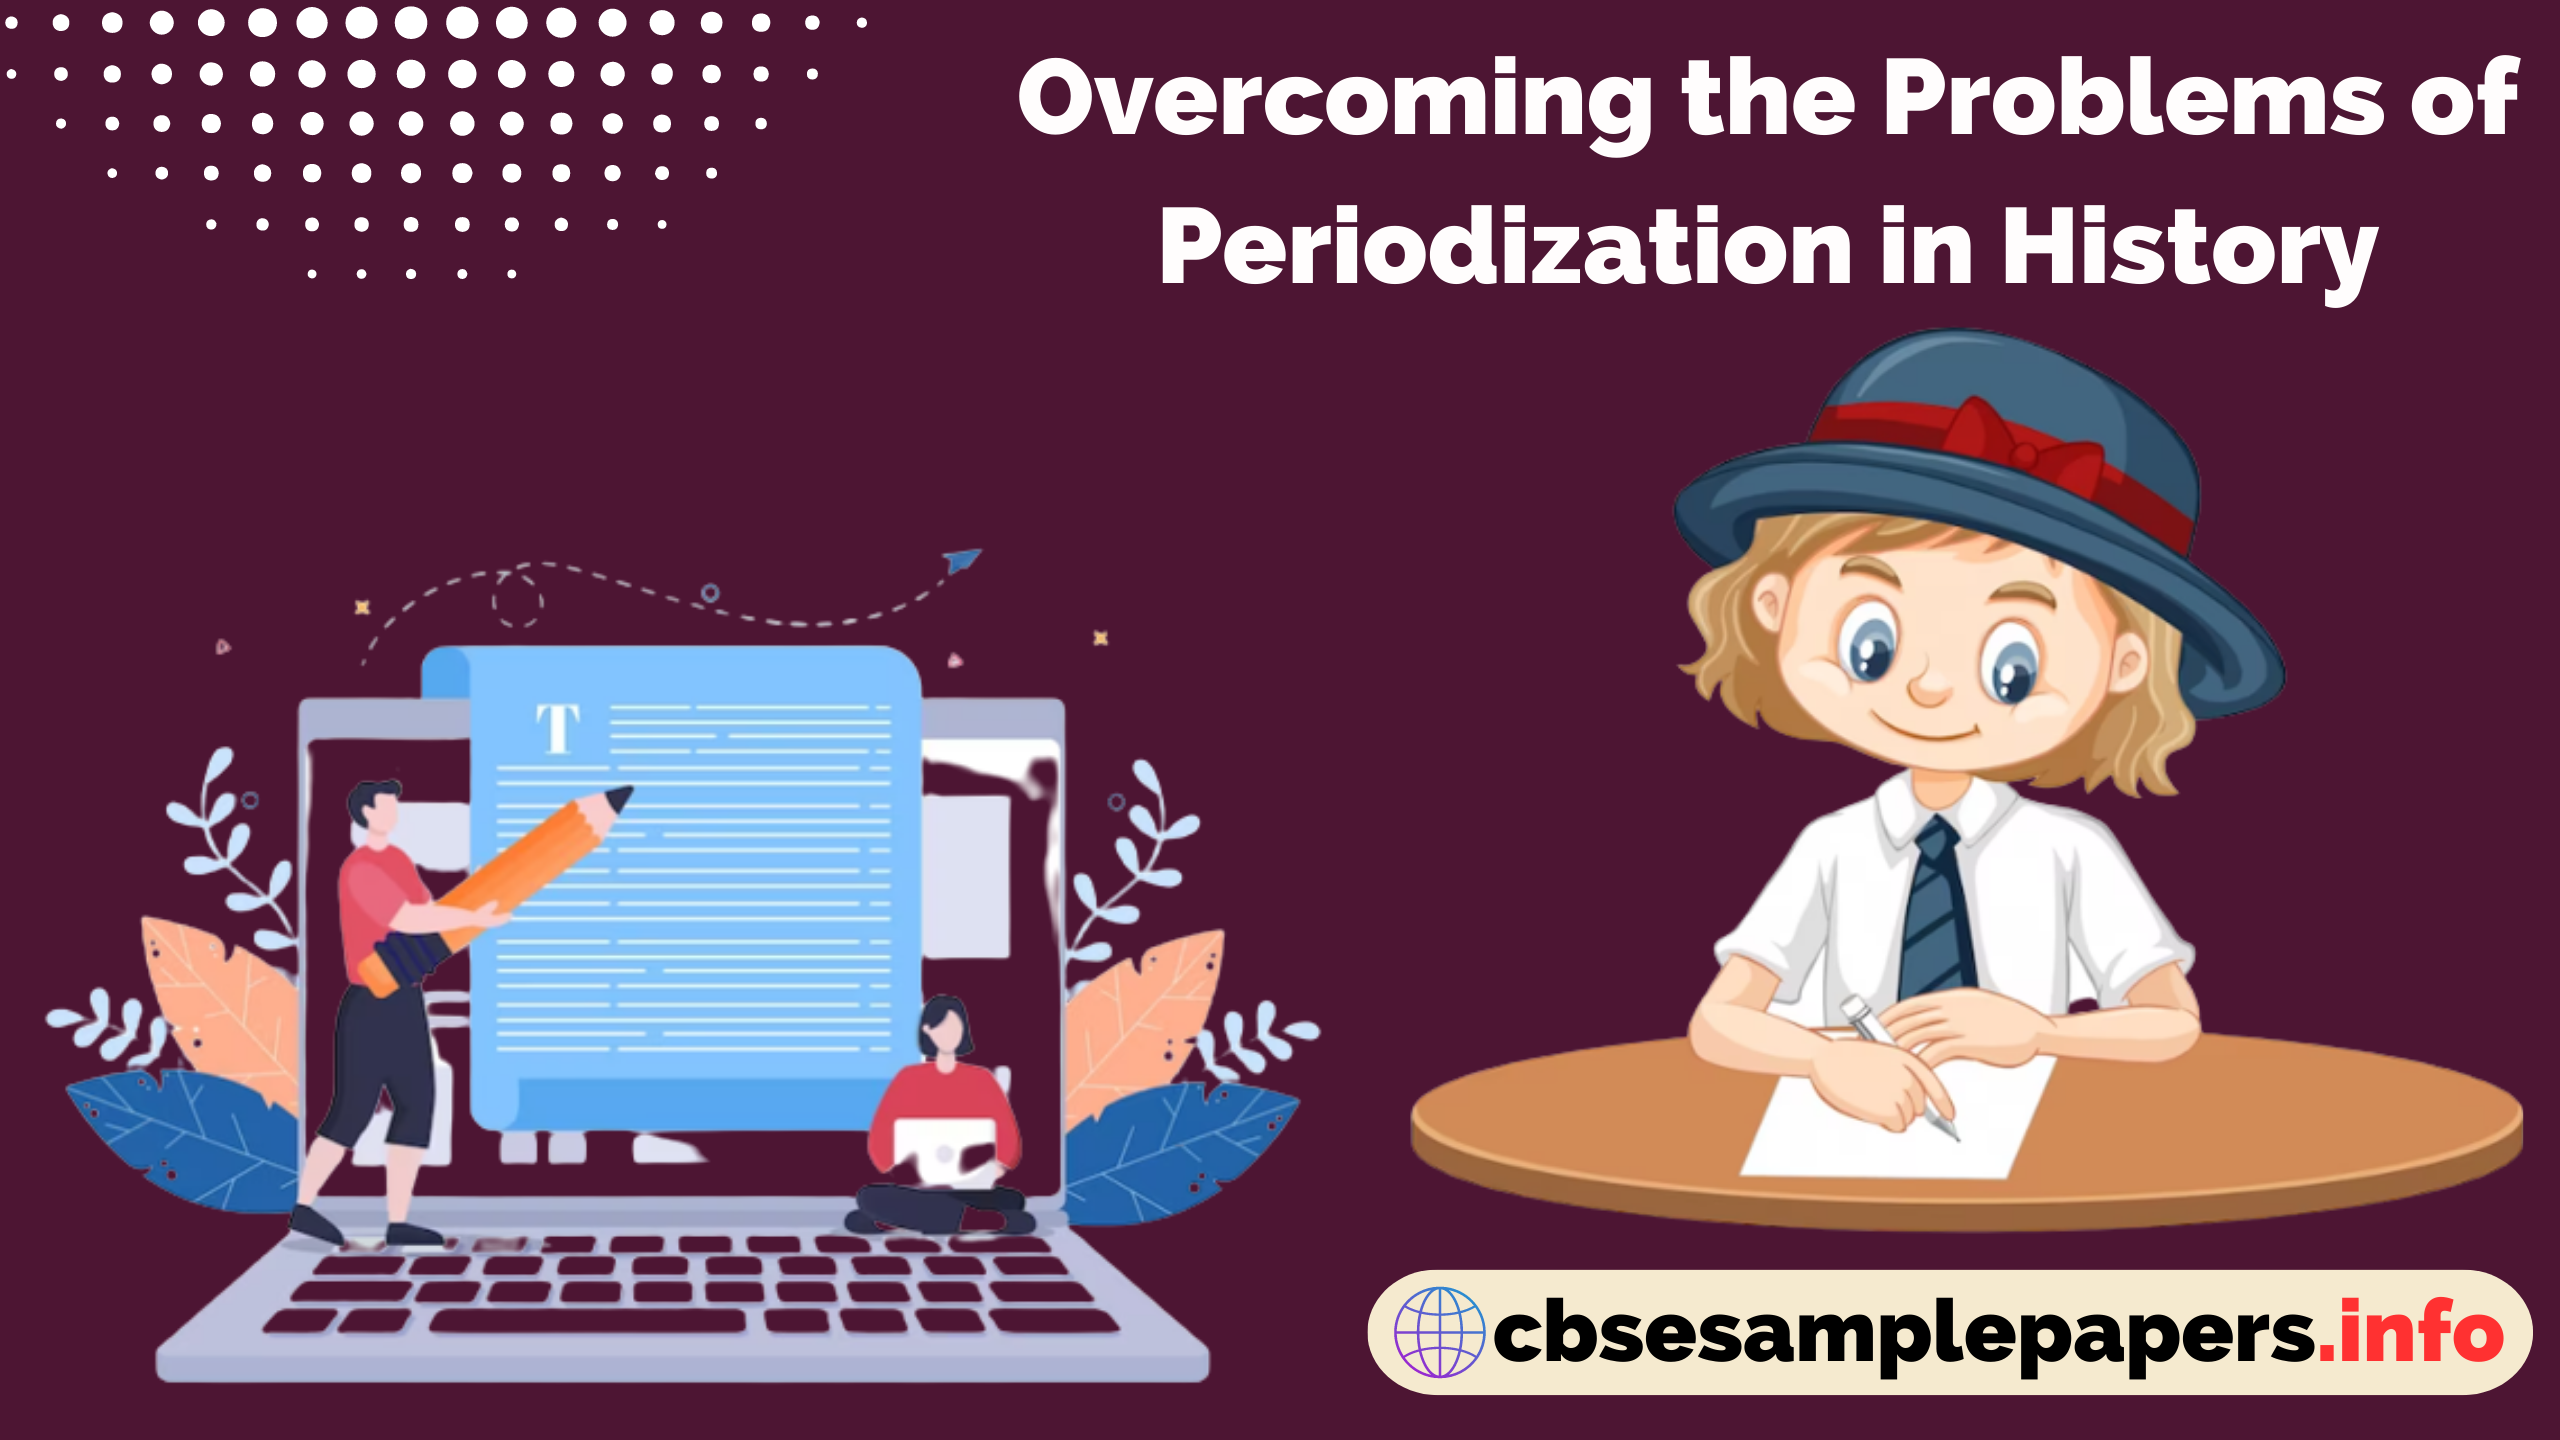 write a short essay on problems of periodization in history